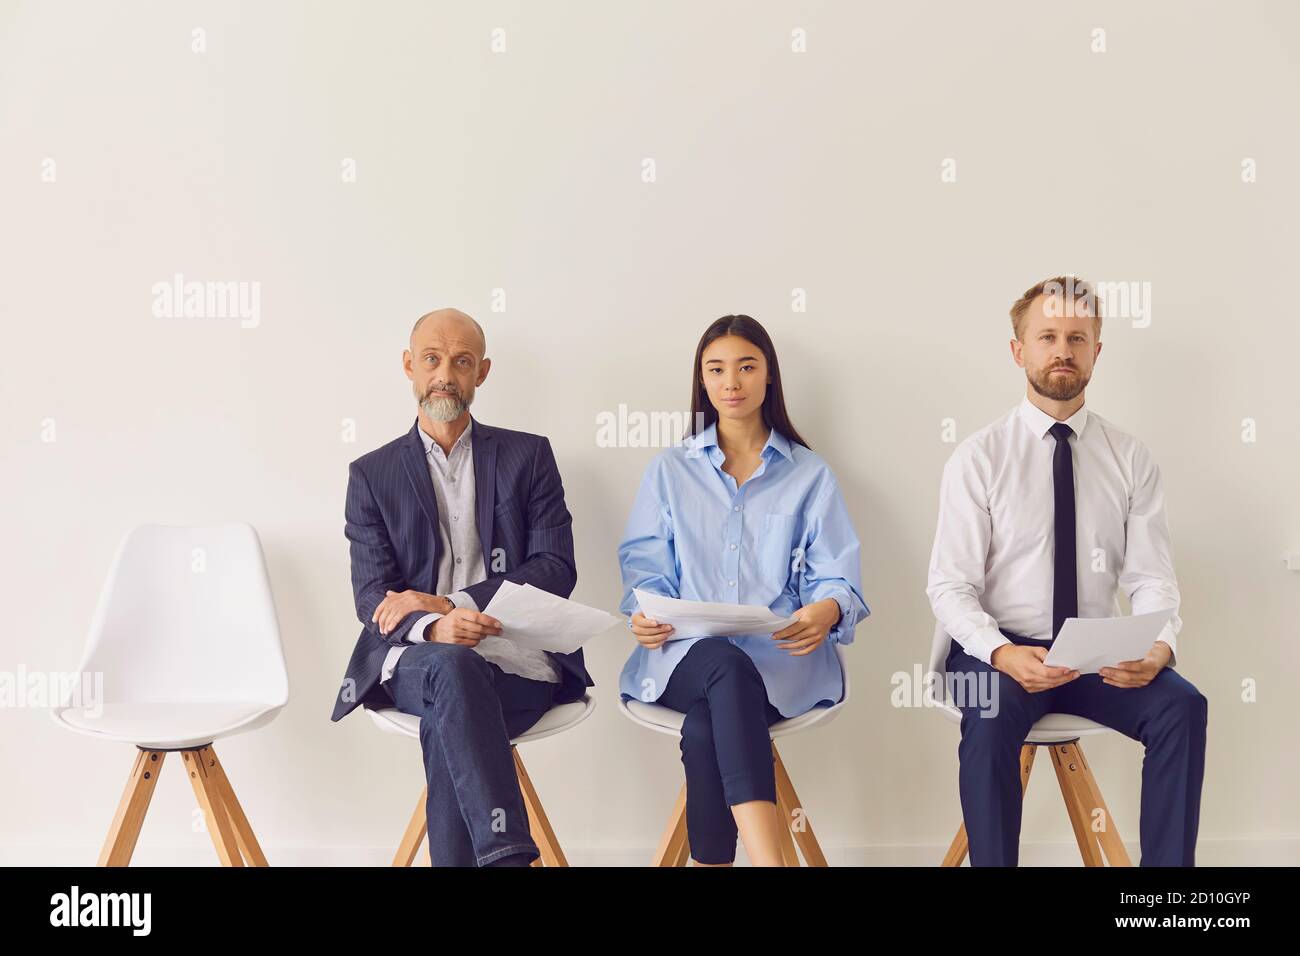 Three multiracial candidates of different ages sitting on chairs waiting for job interview Stock Photo